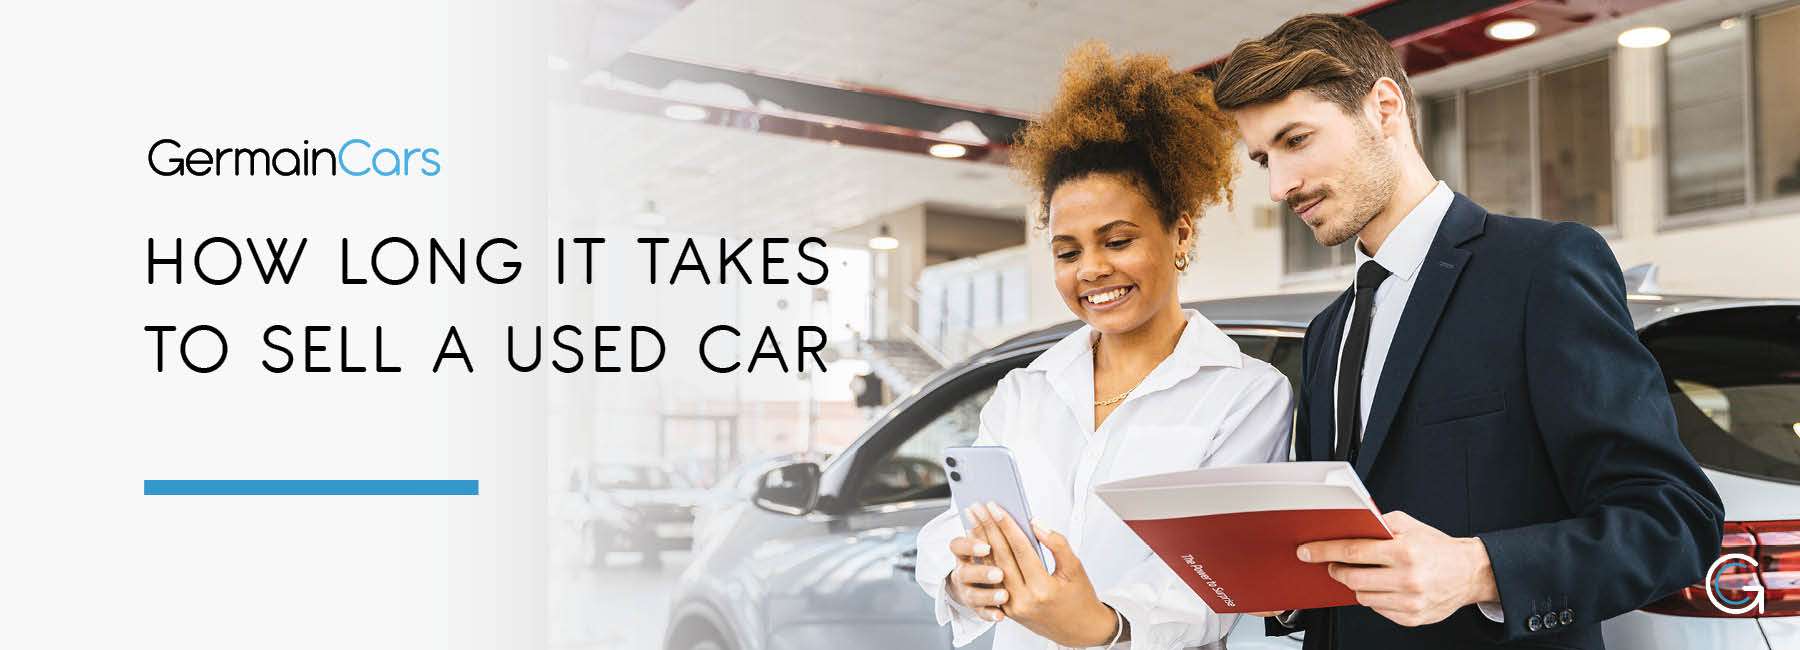 Find Out How to Sell Your Used Car for Cash - Germain Cars Group Site